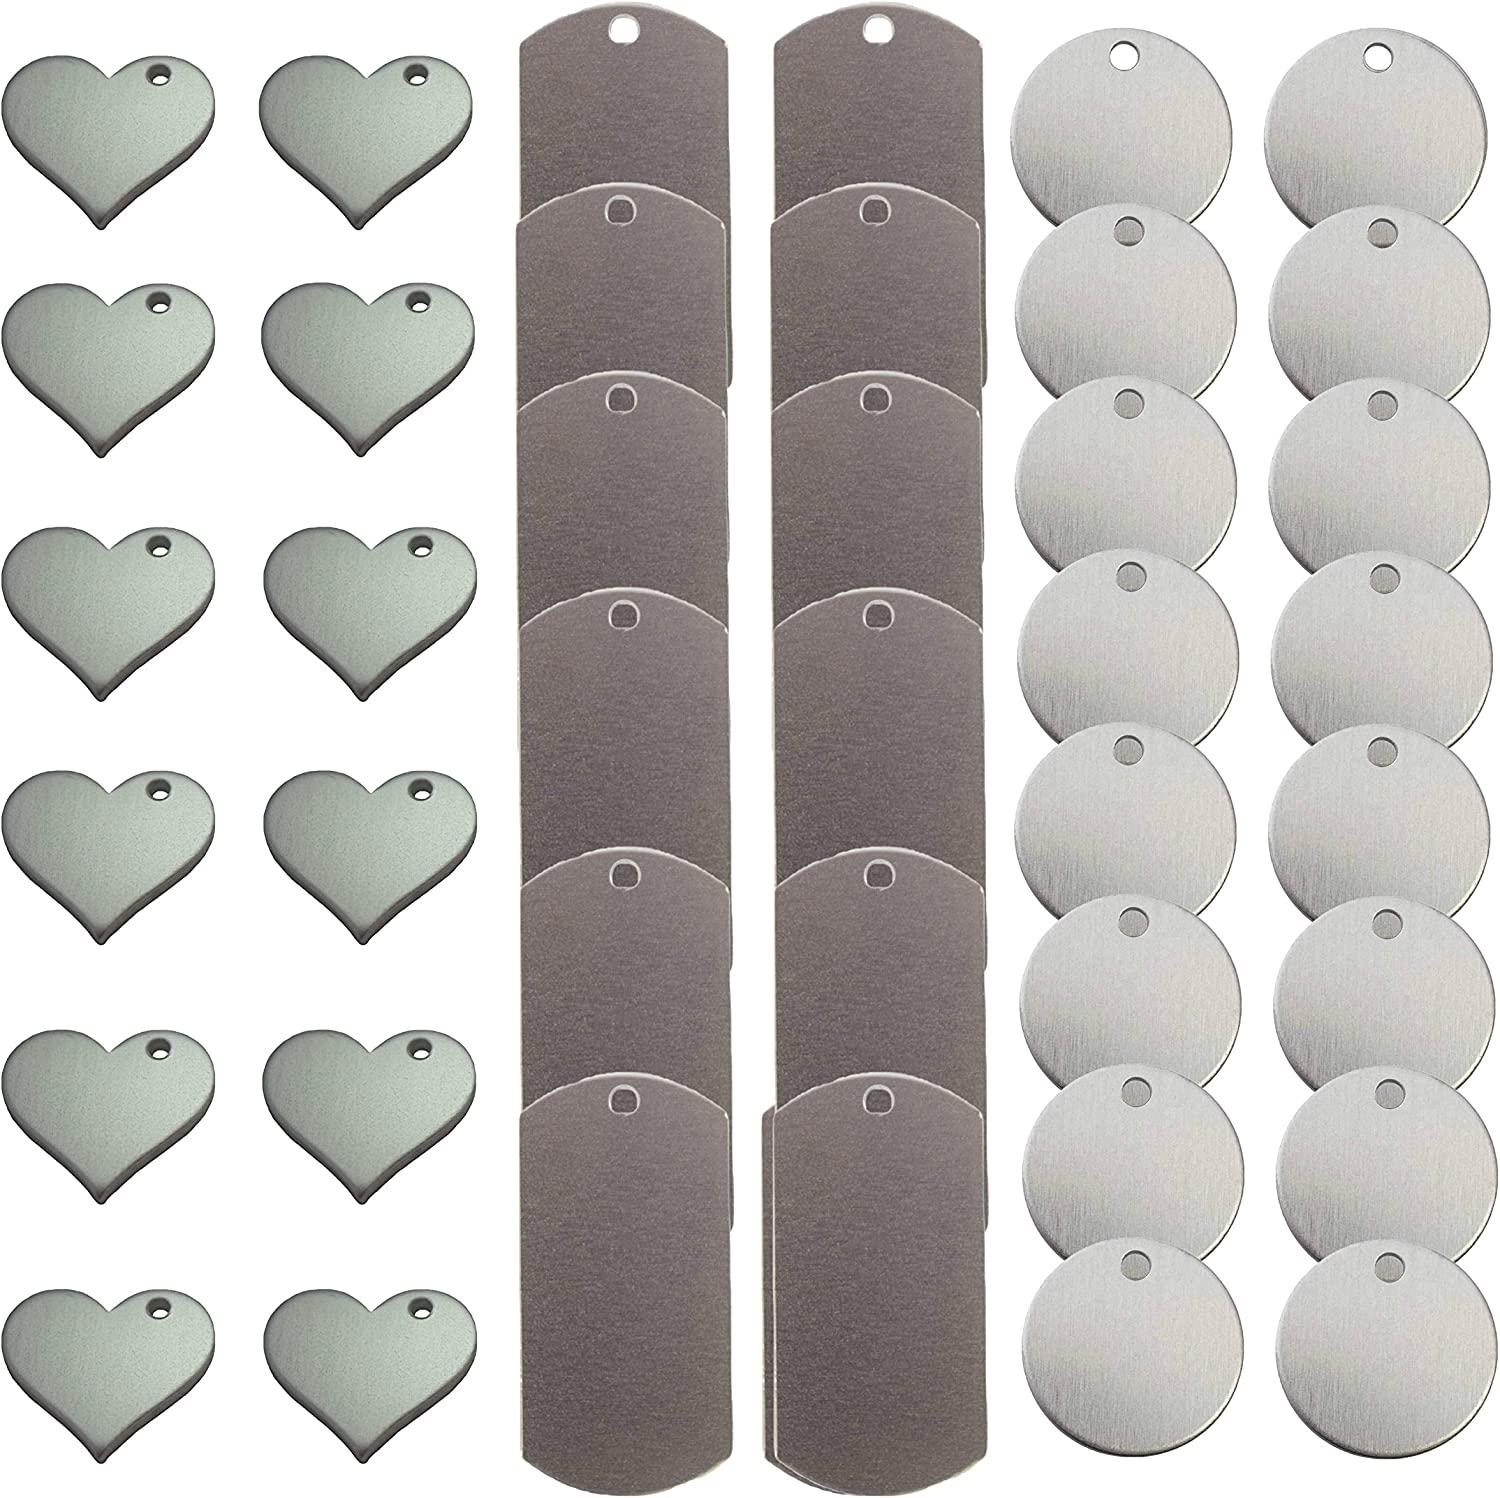 Zoom Precision, Metal Stamping Blanks for Engraving or Stamping: Metal Heart Blanks, Dog Tag Blanks, and Circle Tags by Zoom Precision - 40 Pcs